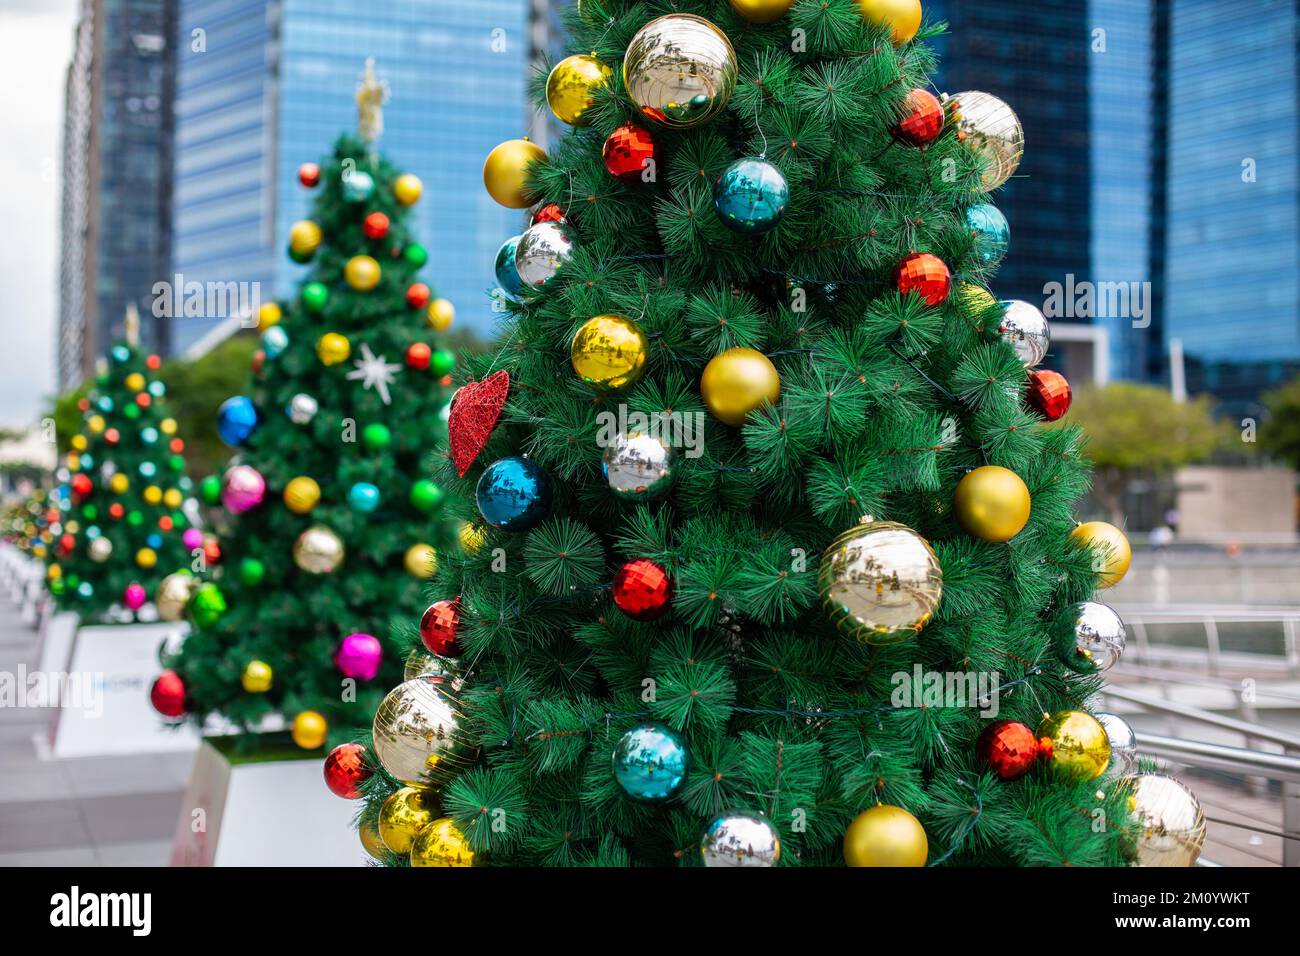 A row of Christmas  trees decoration at outdoor venue against a series of blue buildings. Stock Photo